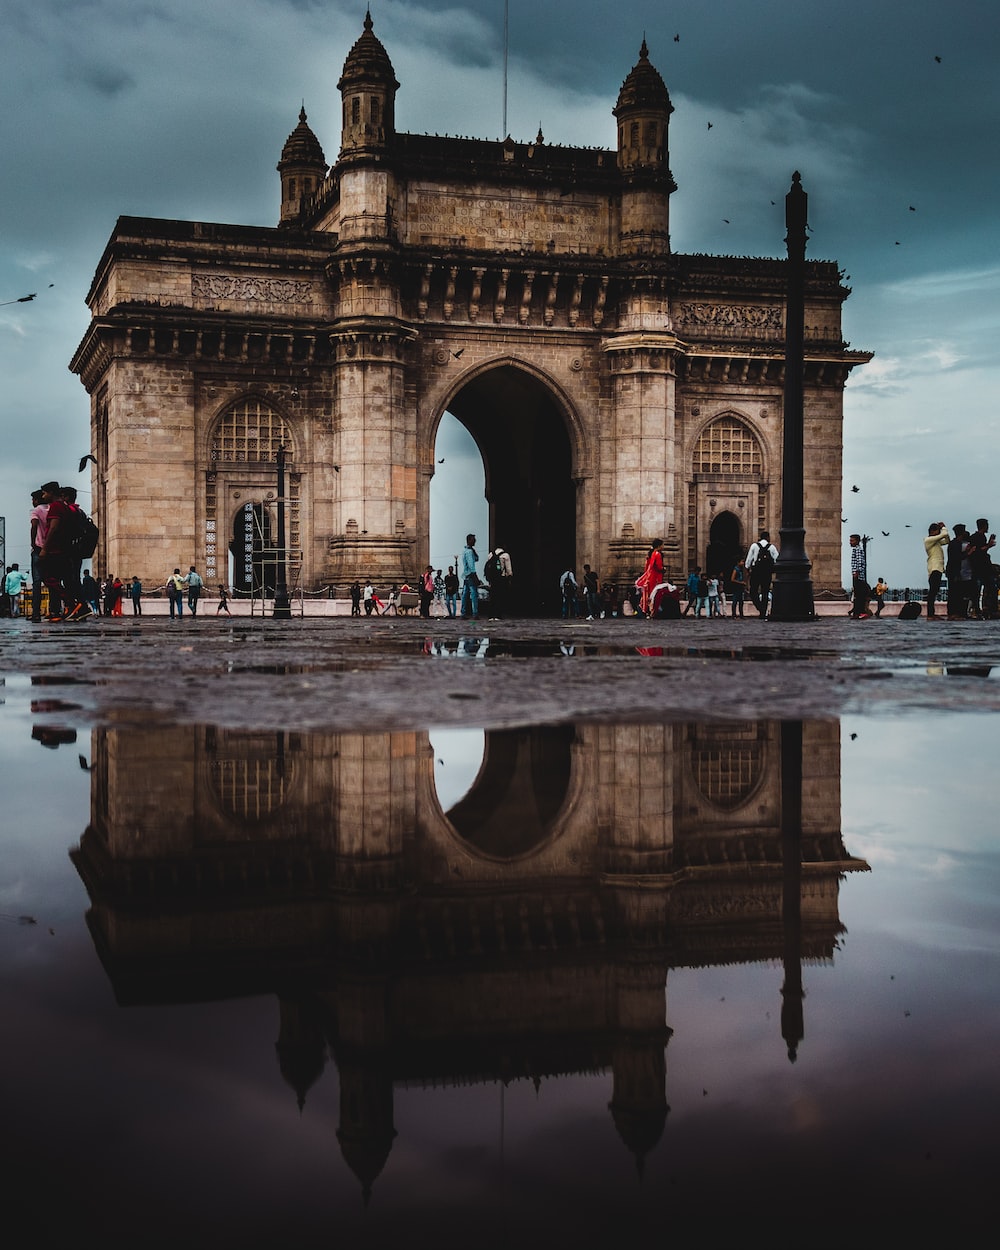 Stunning mumbai pictures hd download free images on